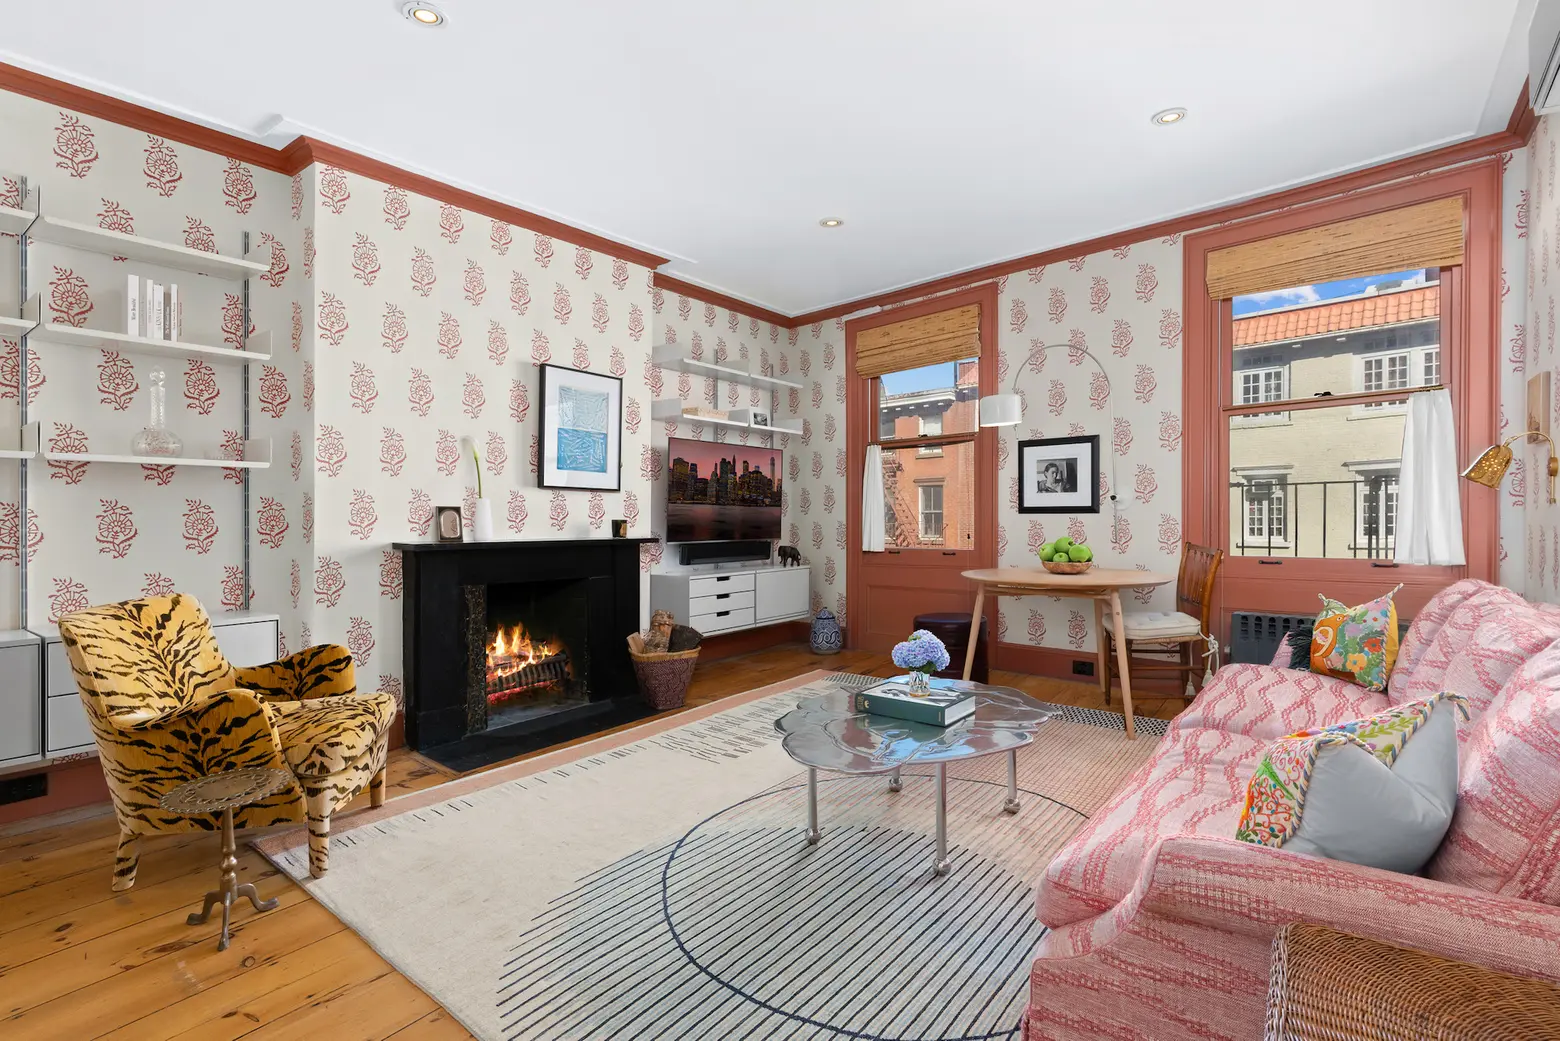 $2.4M co-op adds an eccentric twist to a historic West Village townhouse